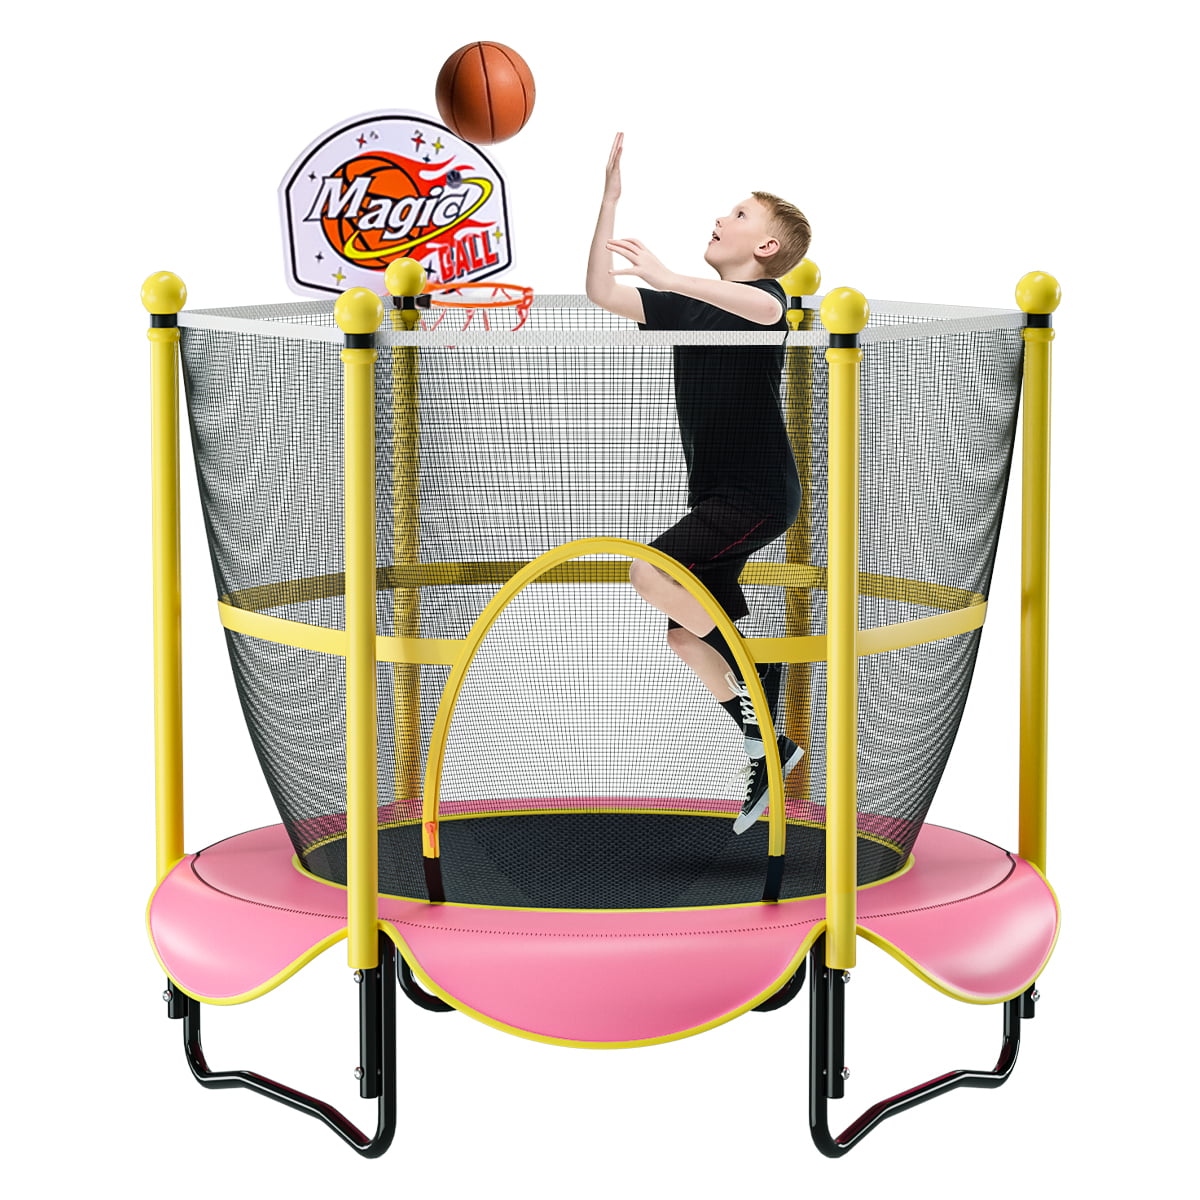 5FT Kids Mini Jumping Round Trampoline Exercise W/ Safety Pad Enclosure Combo 